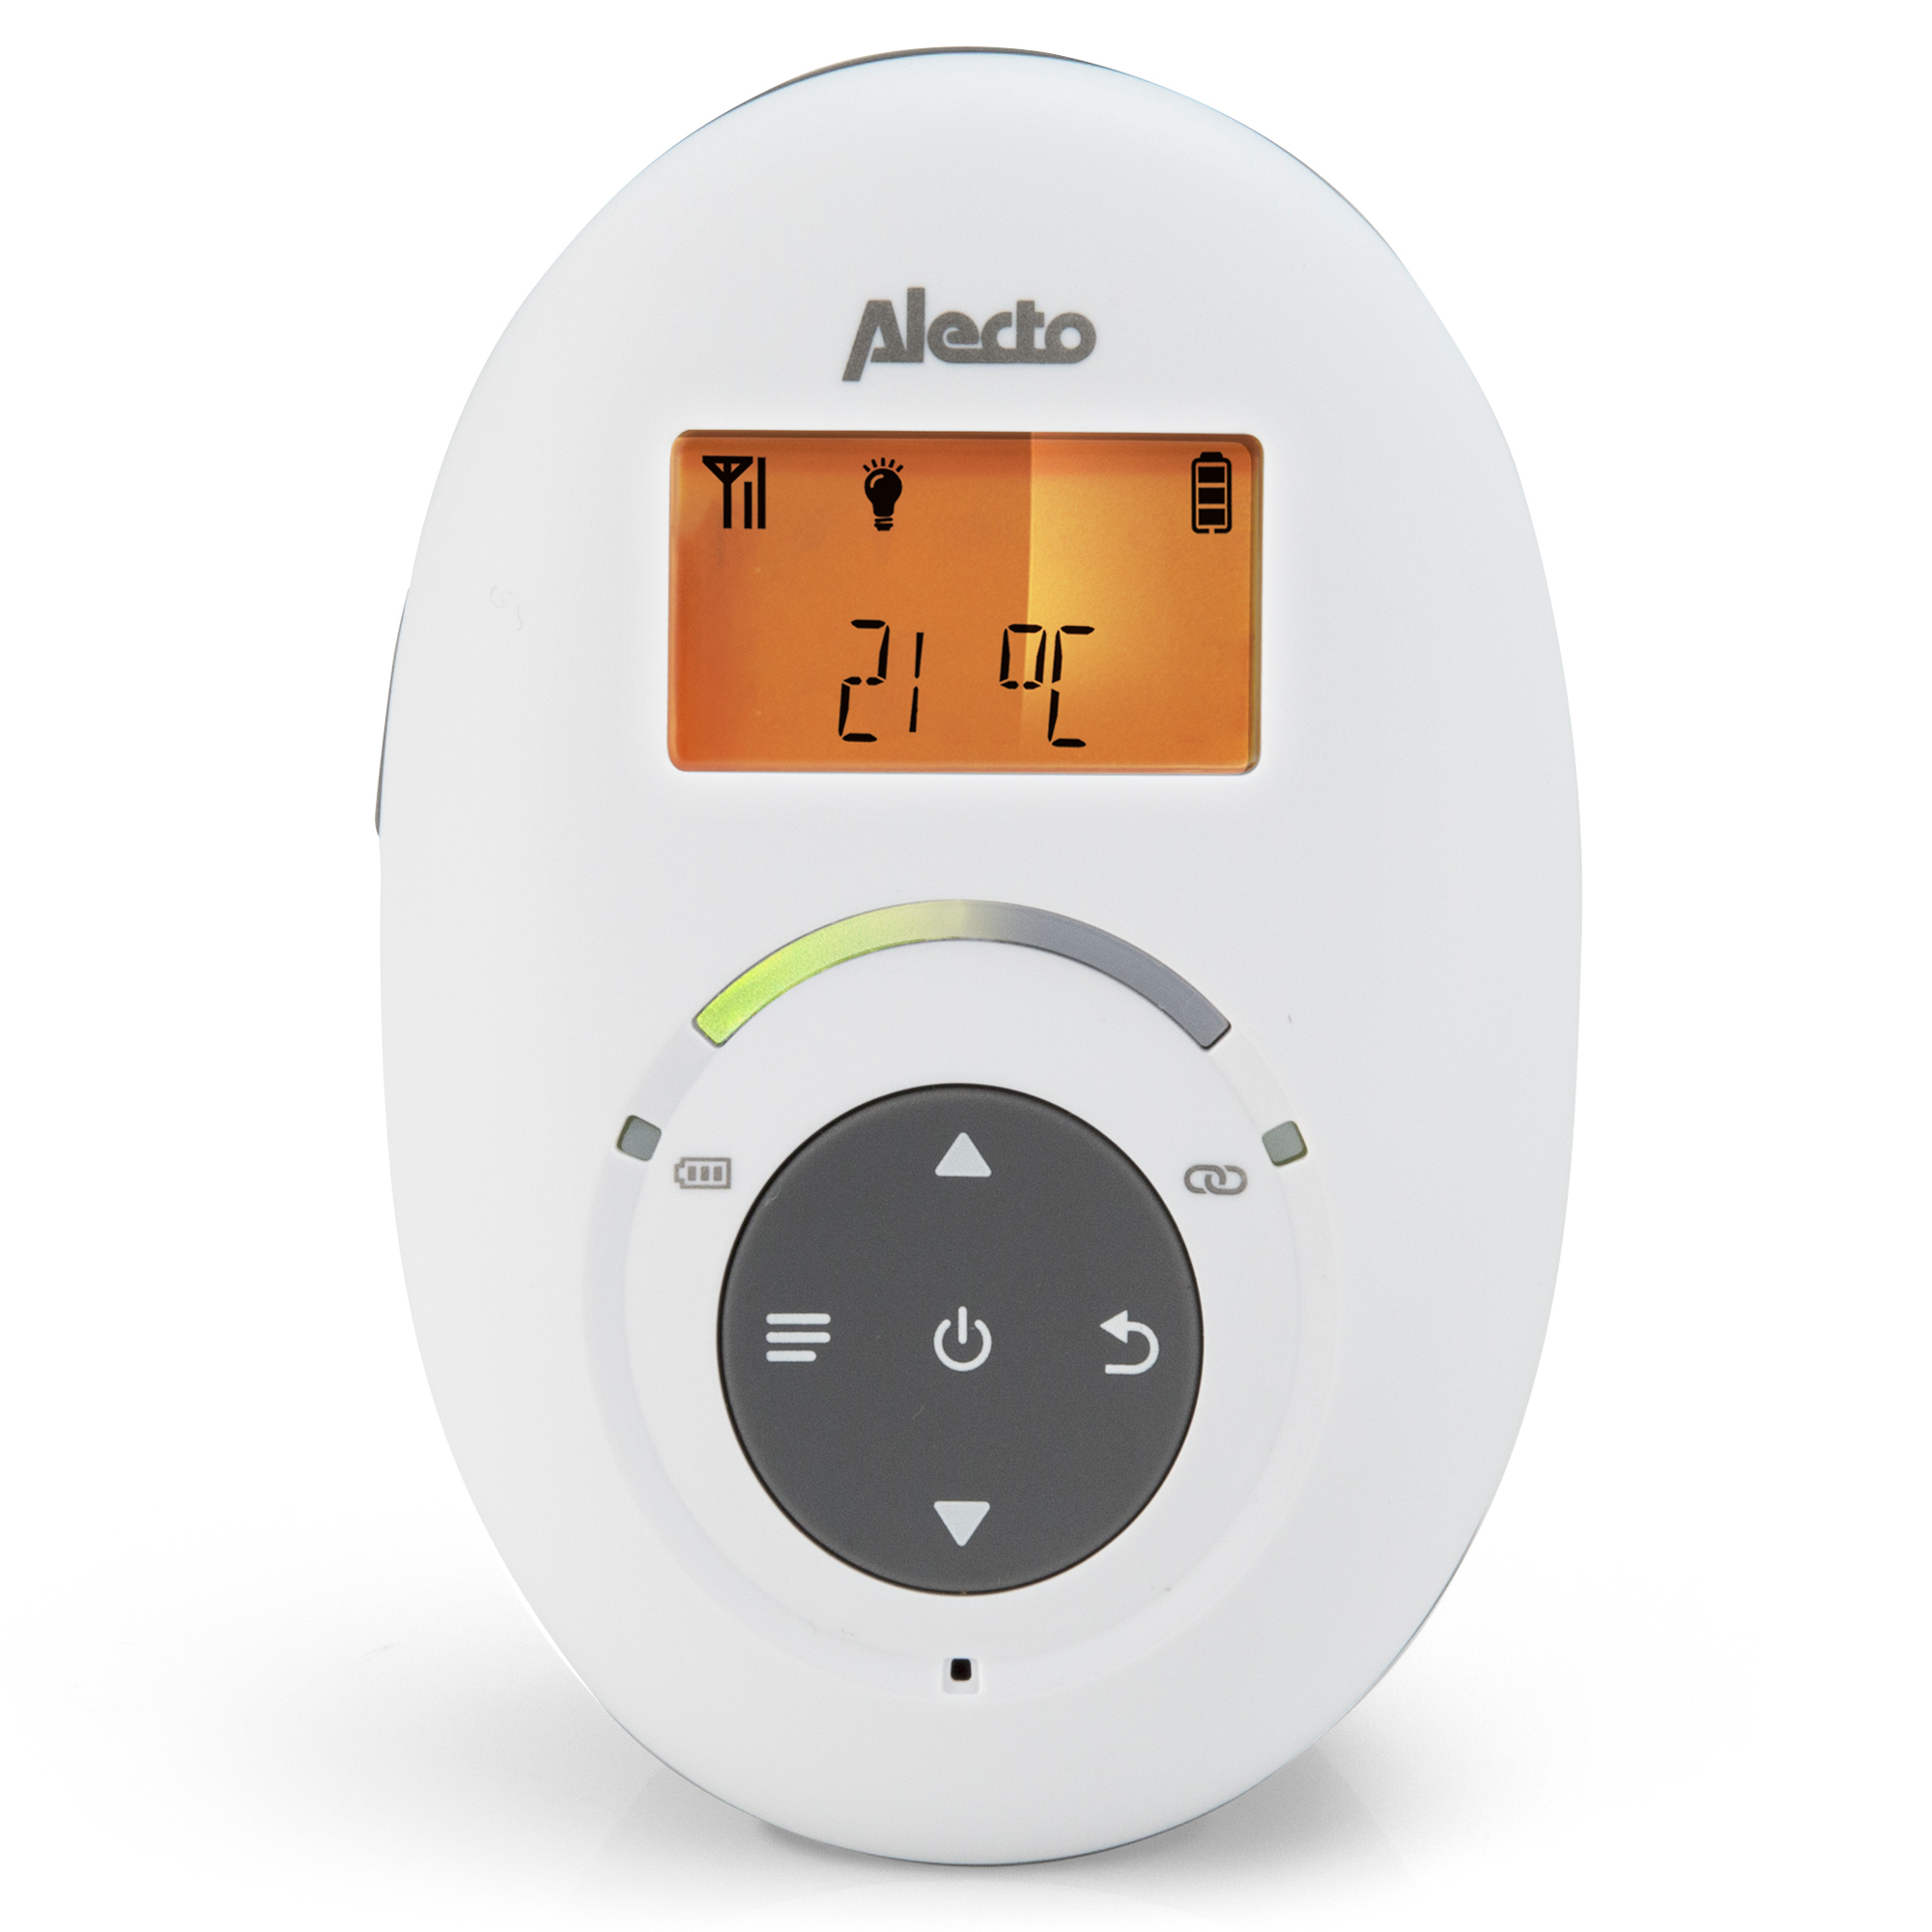 ALECTO DBX-125 - - Eco DECT Babyphone Full